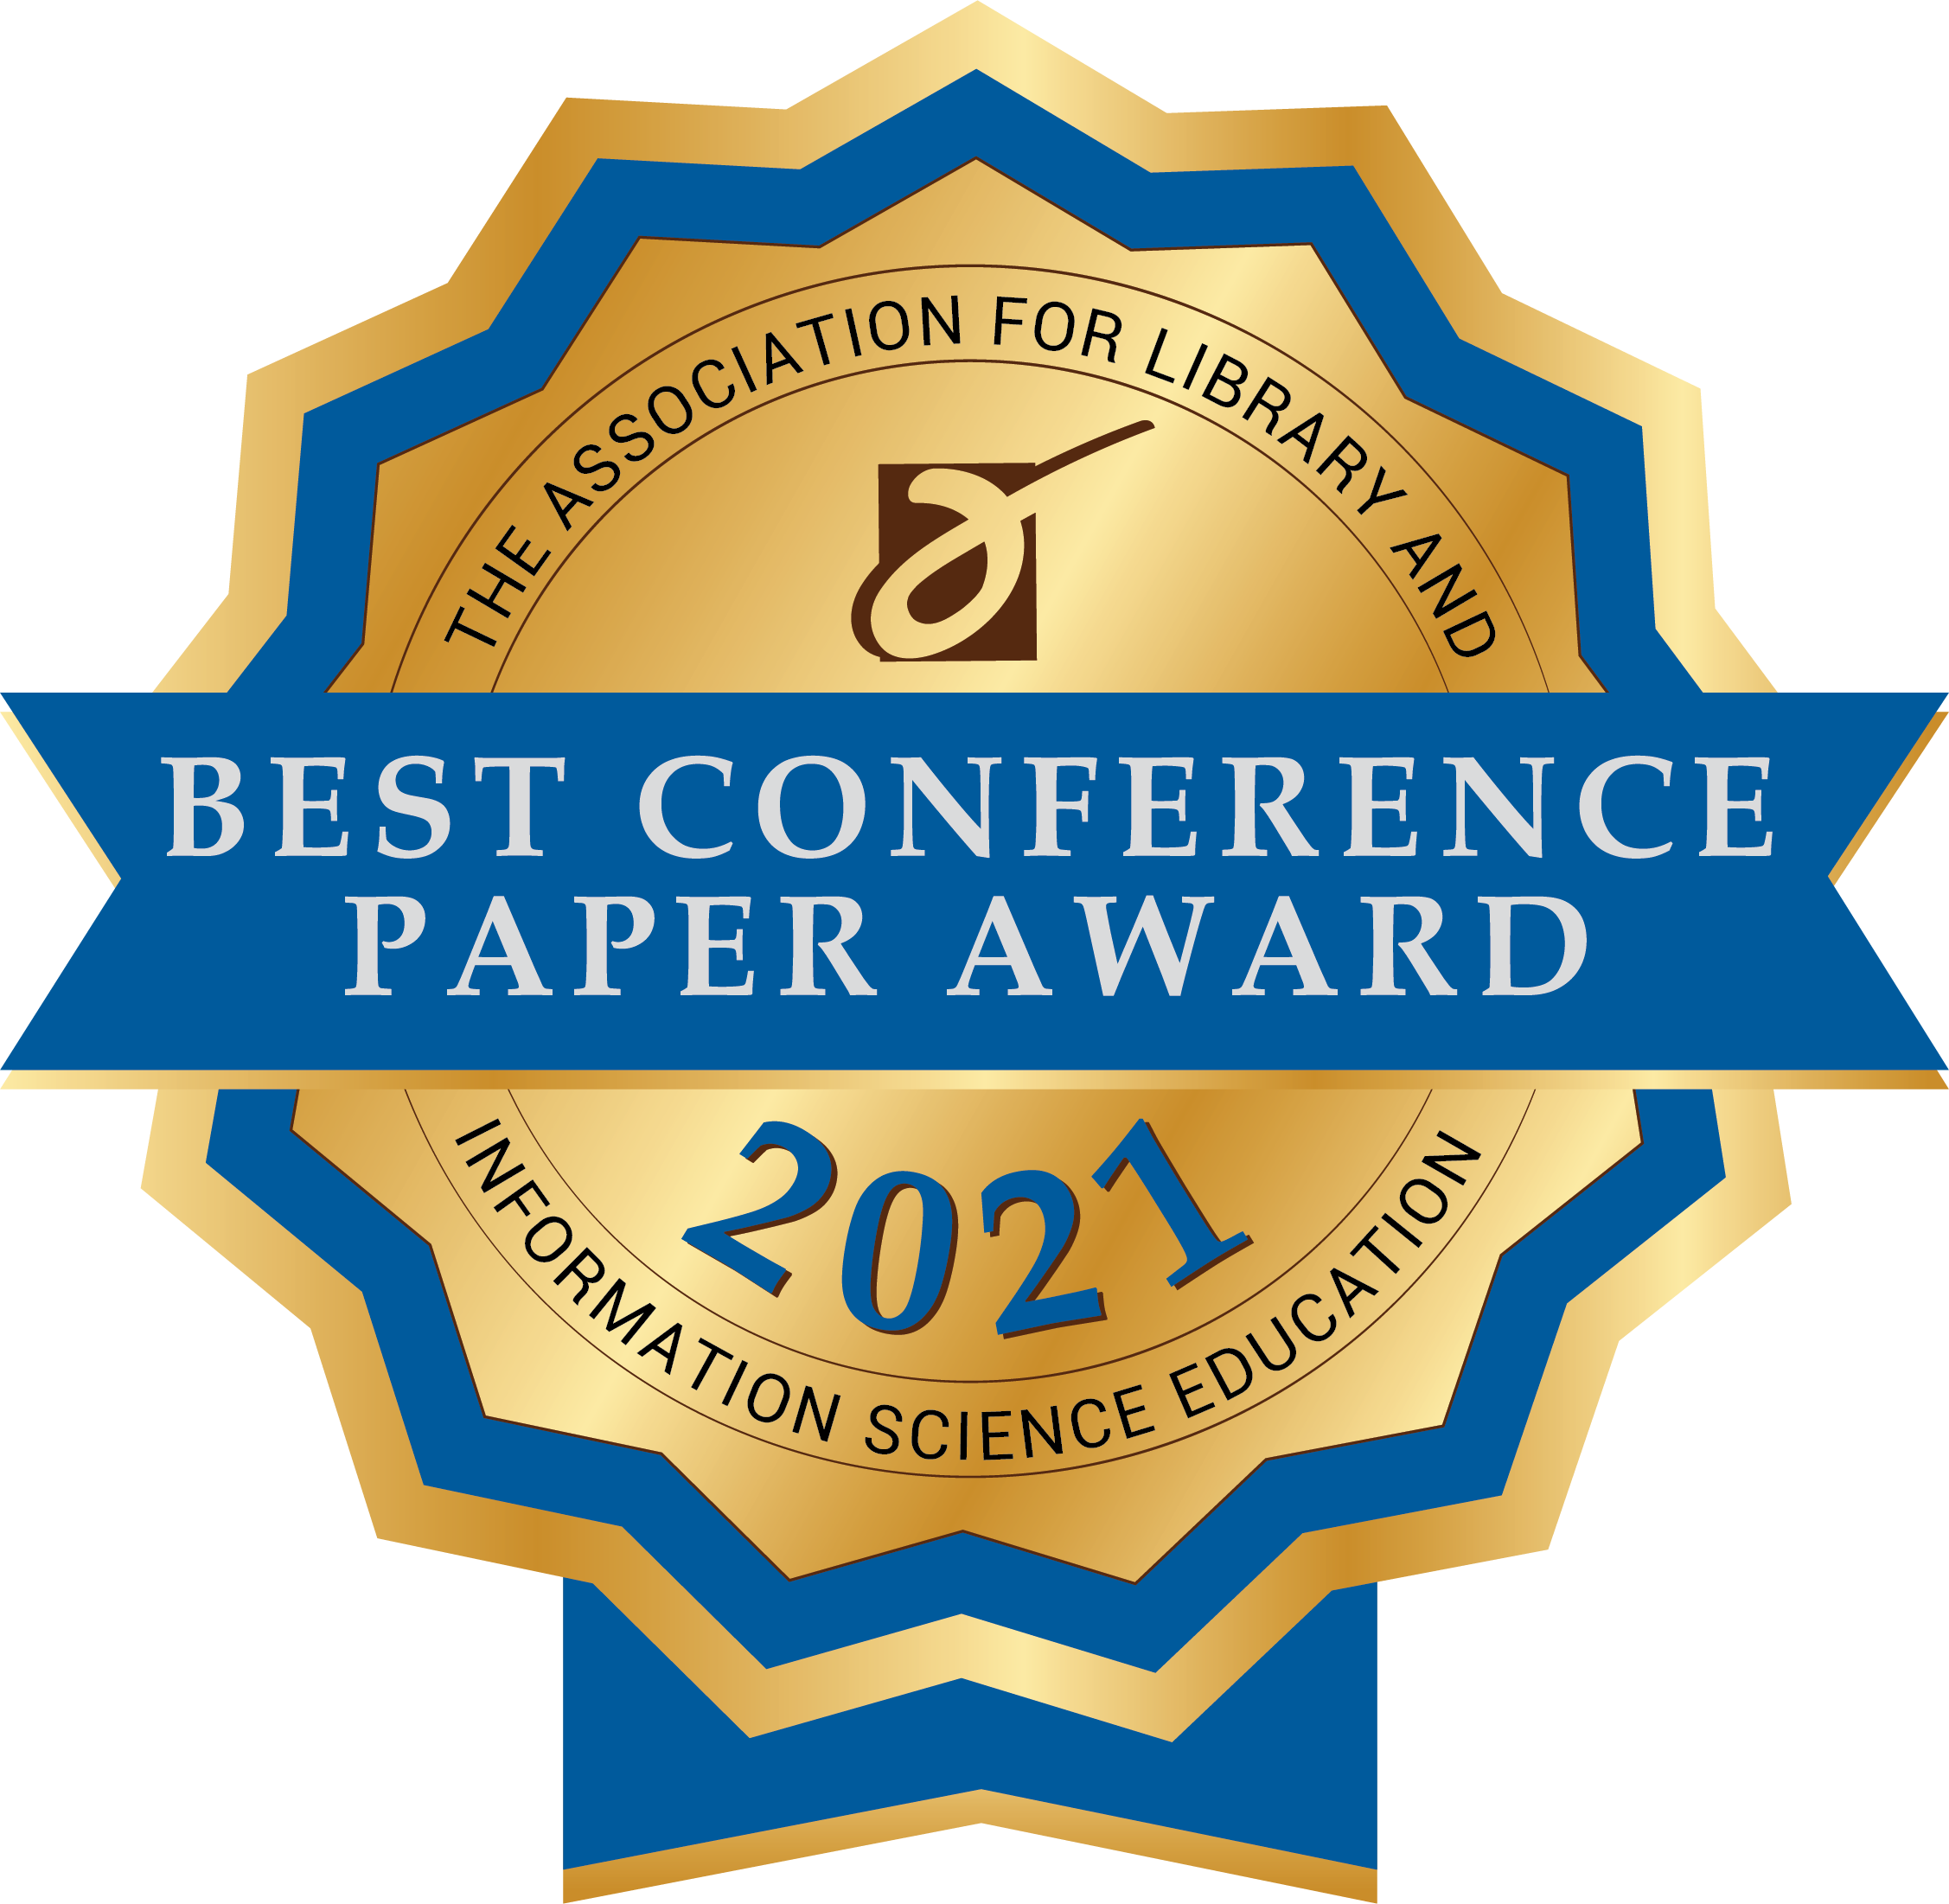 Best Conference Paper Award